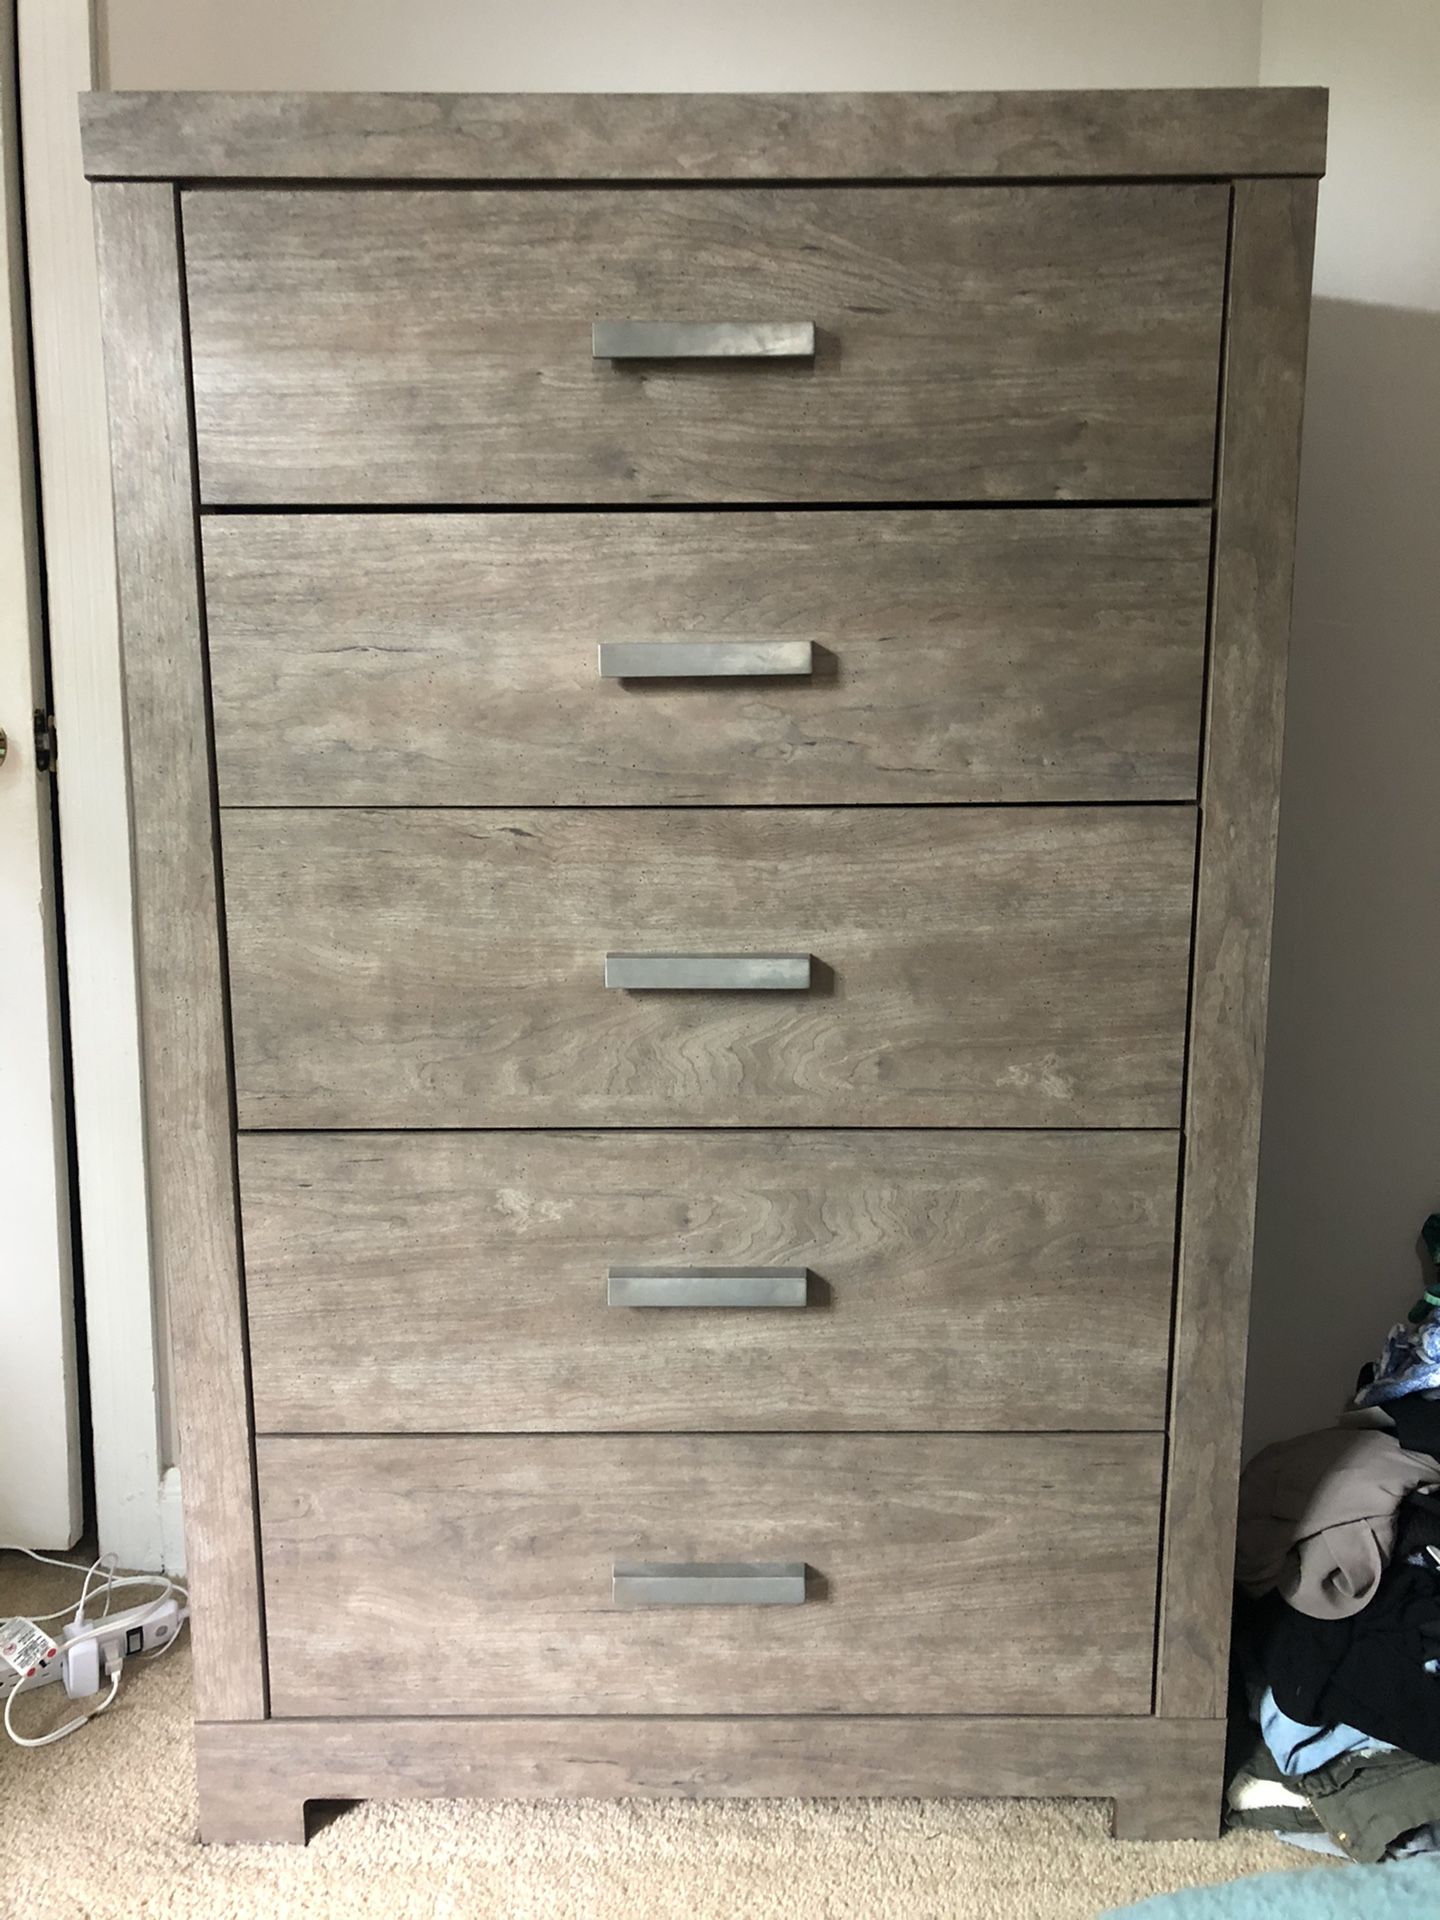 Chest of 5 drawers $200 OBO like new!